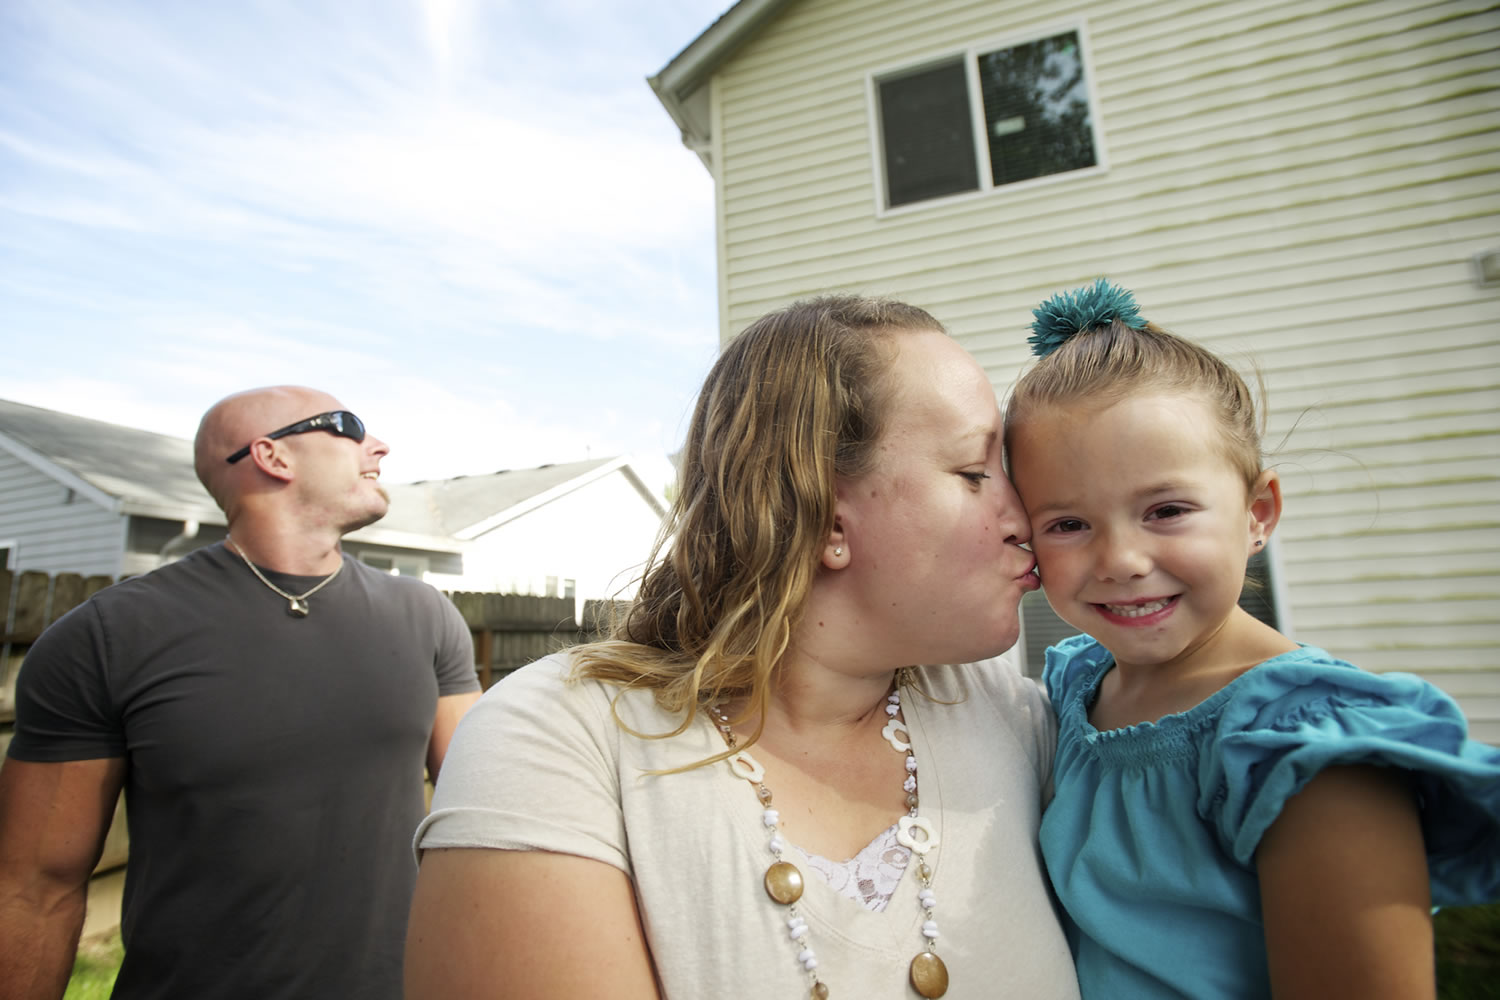 Brynley Verbeck, 4, shown with her mom, Jen Verbeck, fell out of her second-story bedroom window and was caught by attentive neighbor Nathaniel Forest, left.